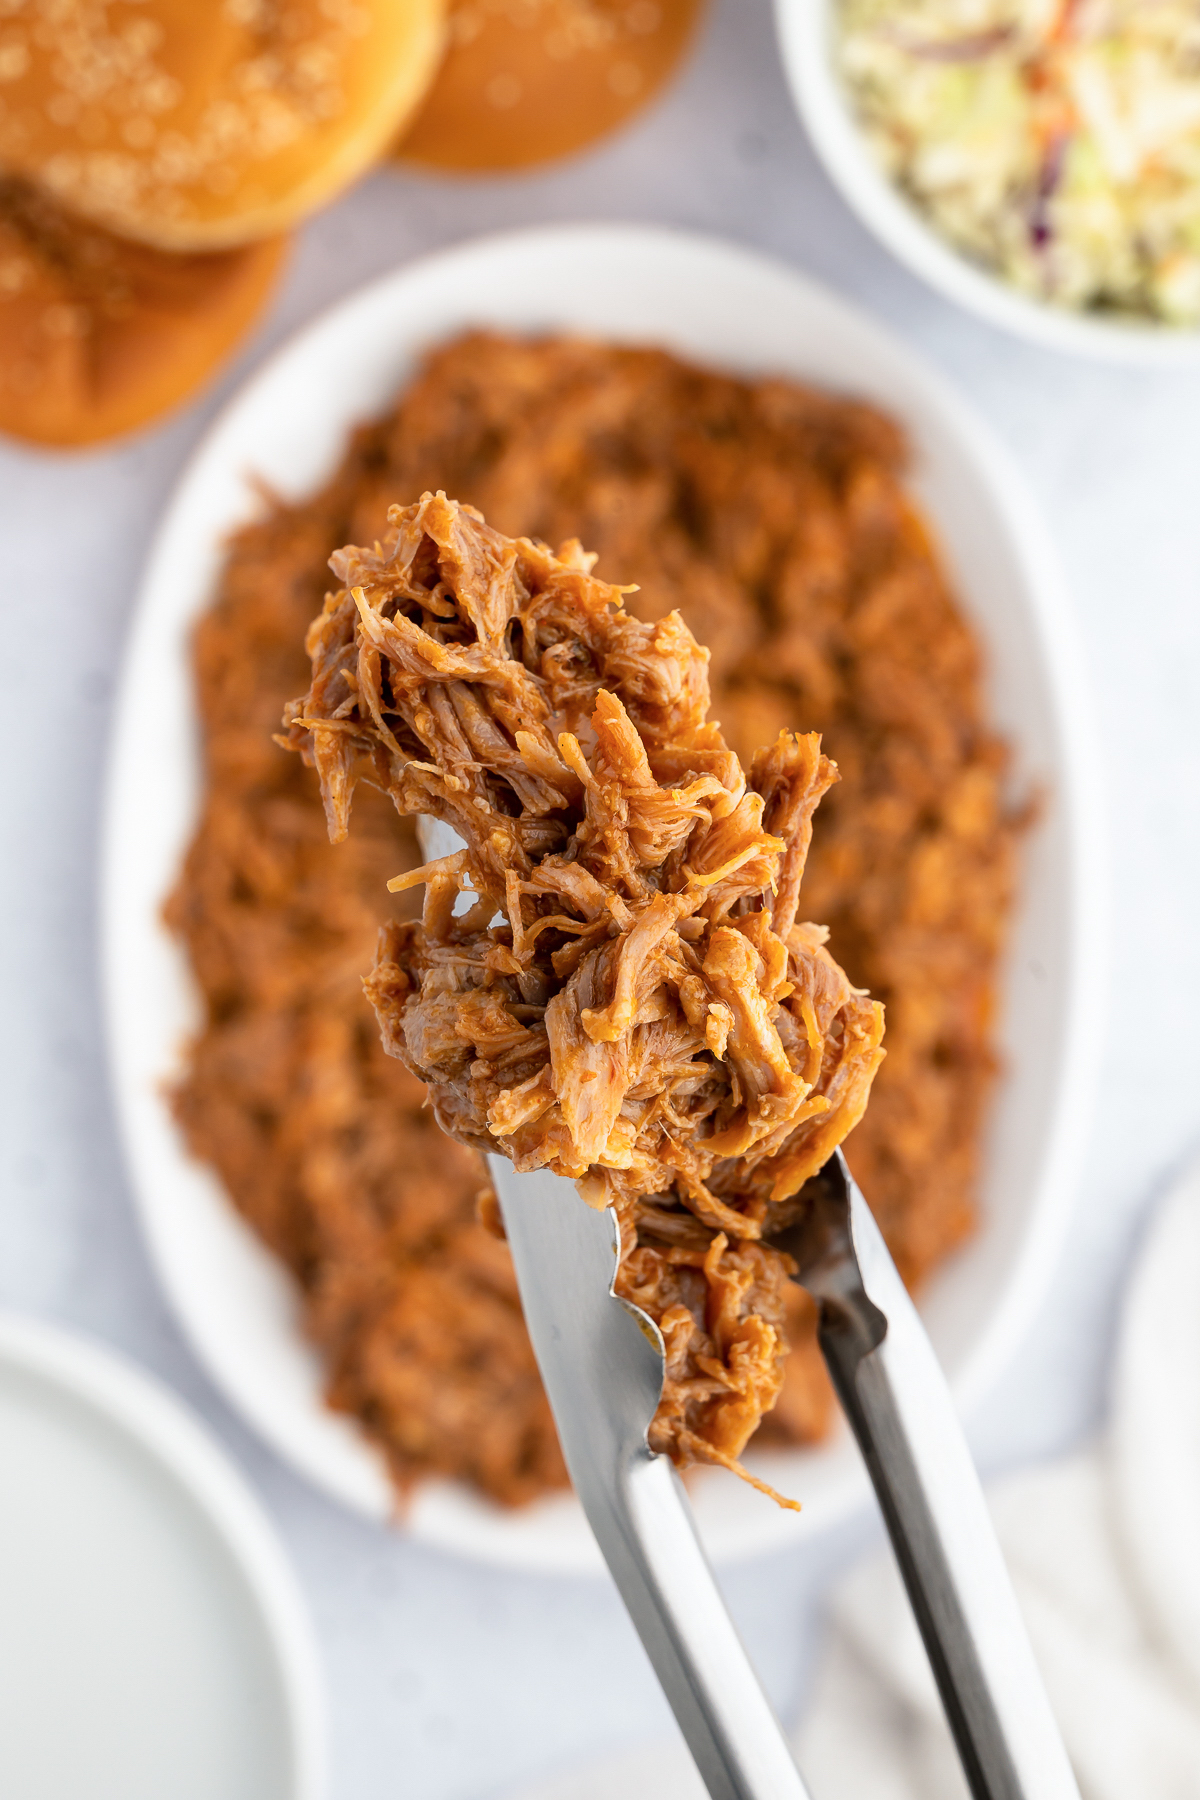 Tongs hold up Instant Pot pulled pork. A serving dish full of it is out of focus in the background.